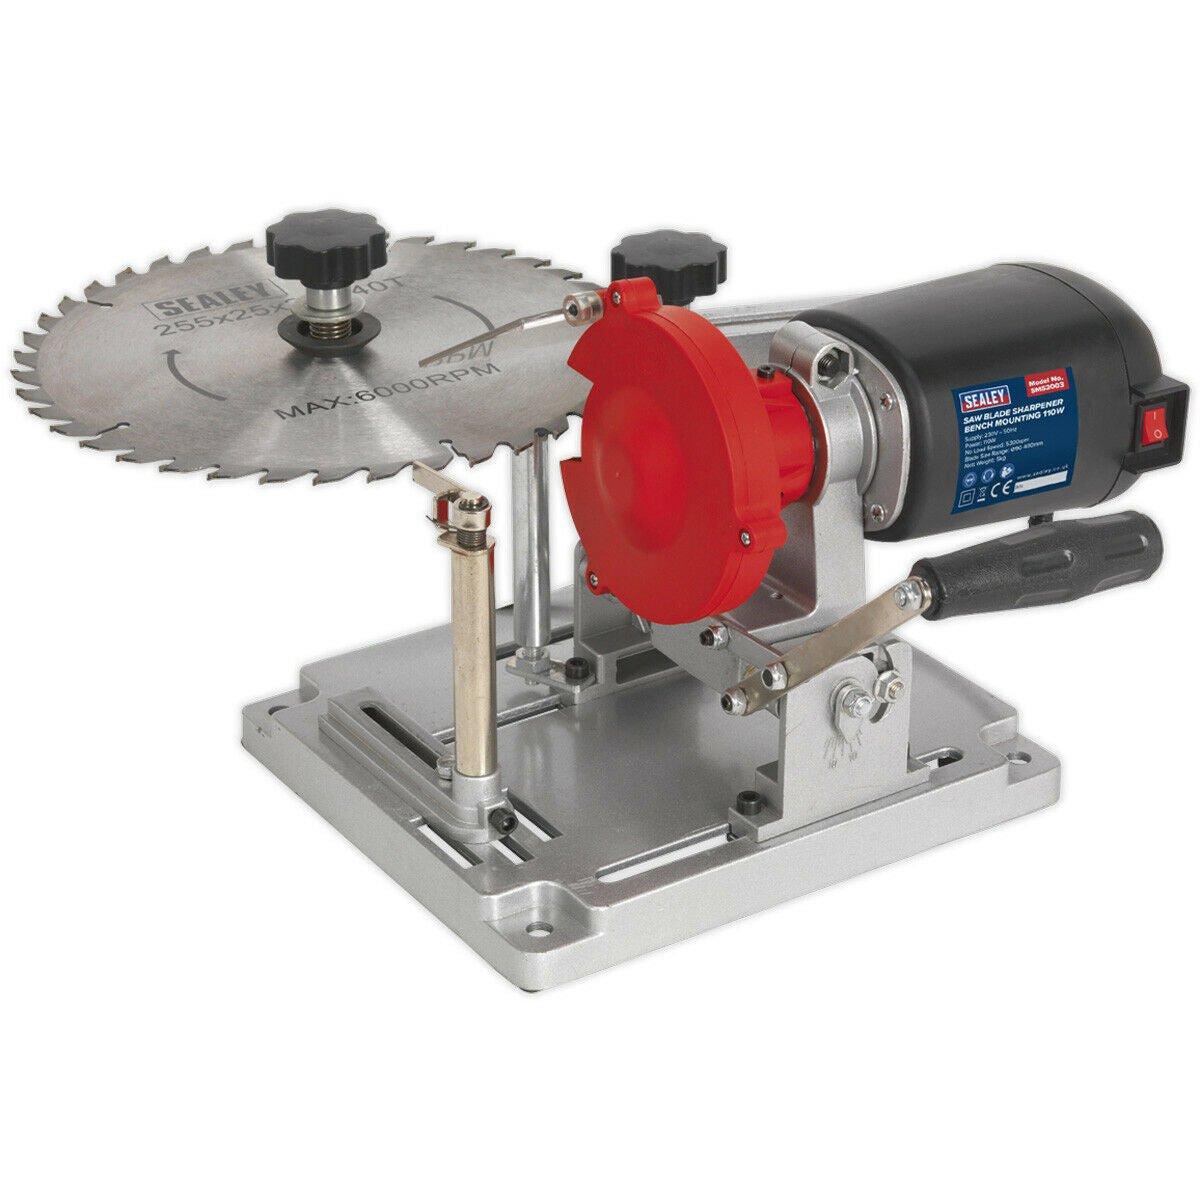 Bench Mounted Saw Blade Sharpener - Suitable for TCT Saw Blades - 110W Motor